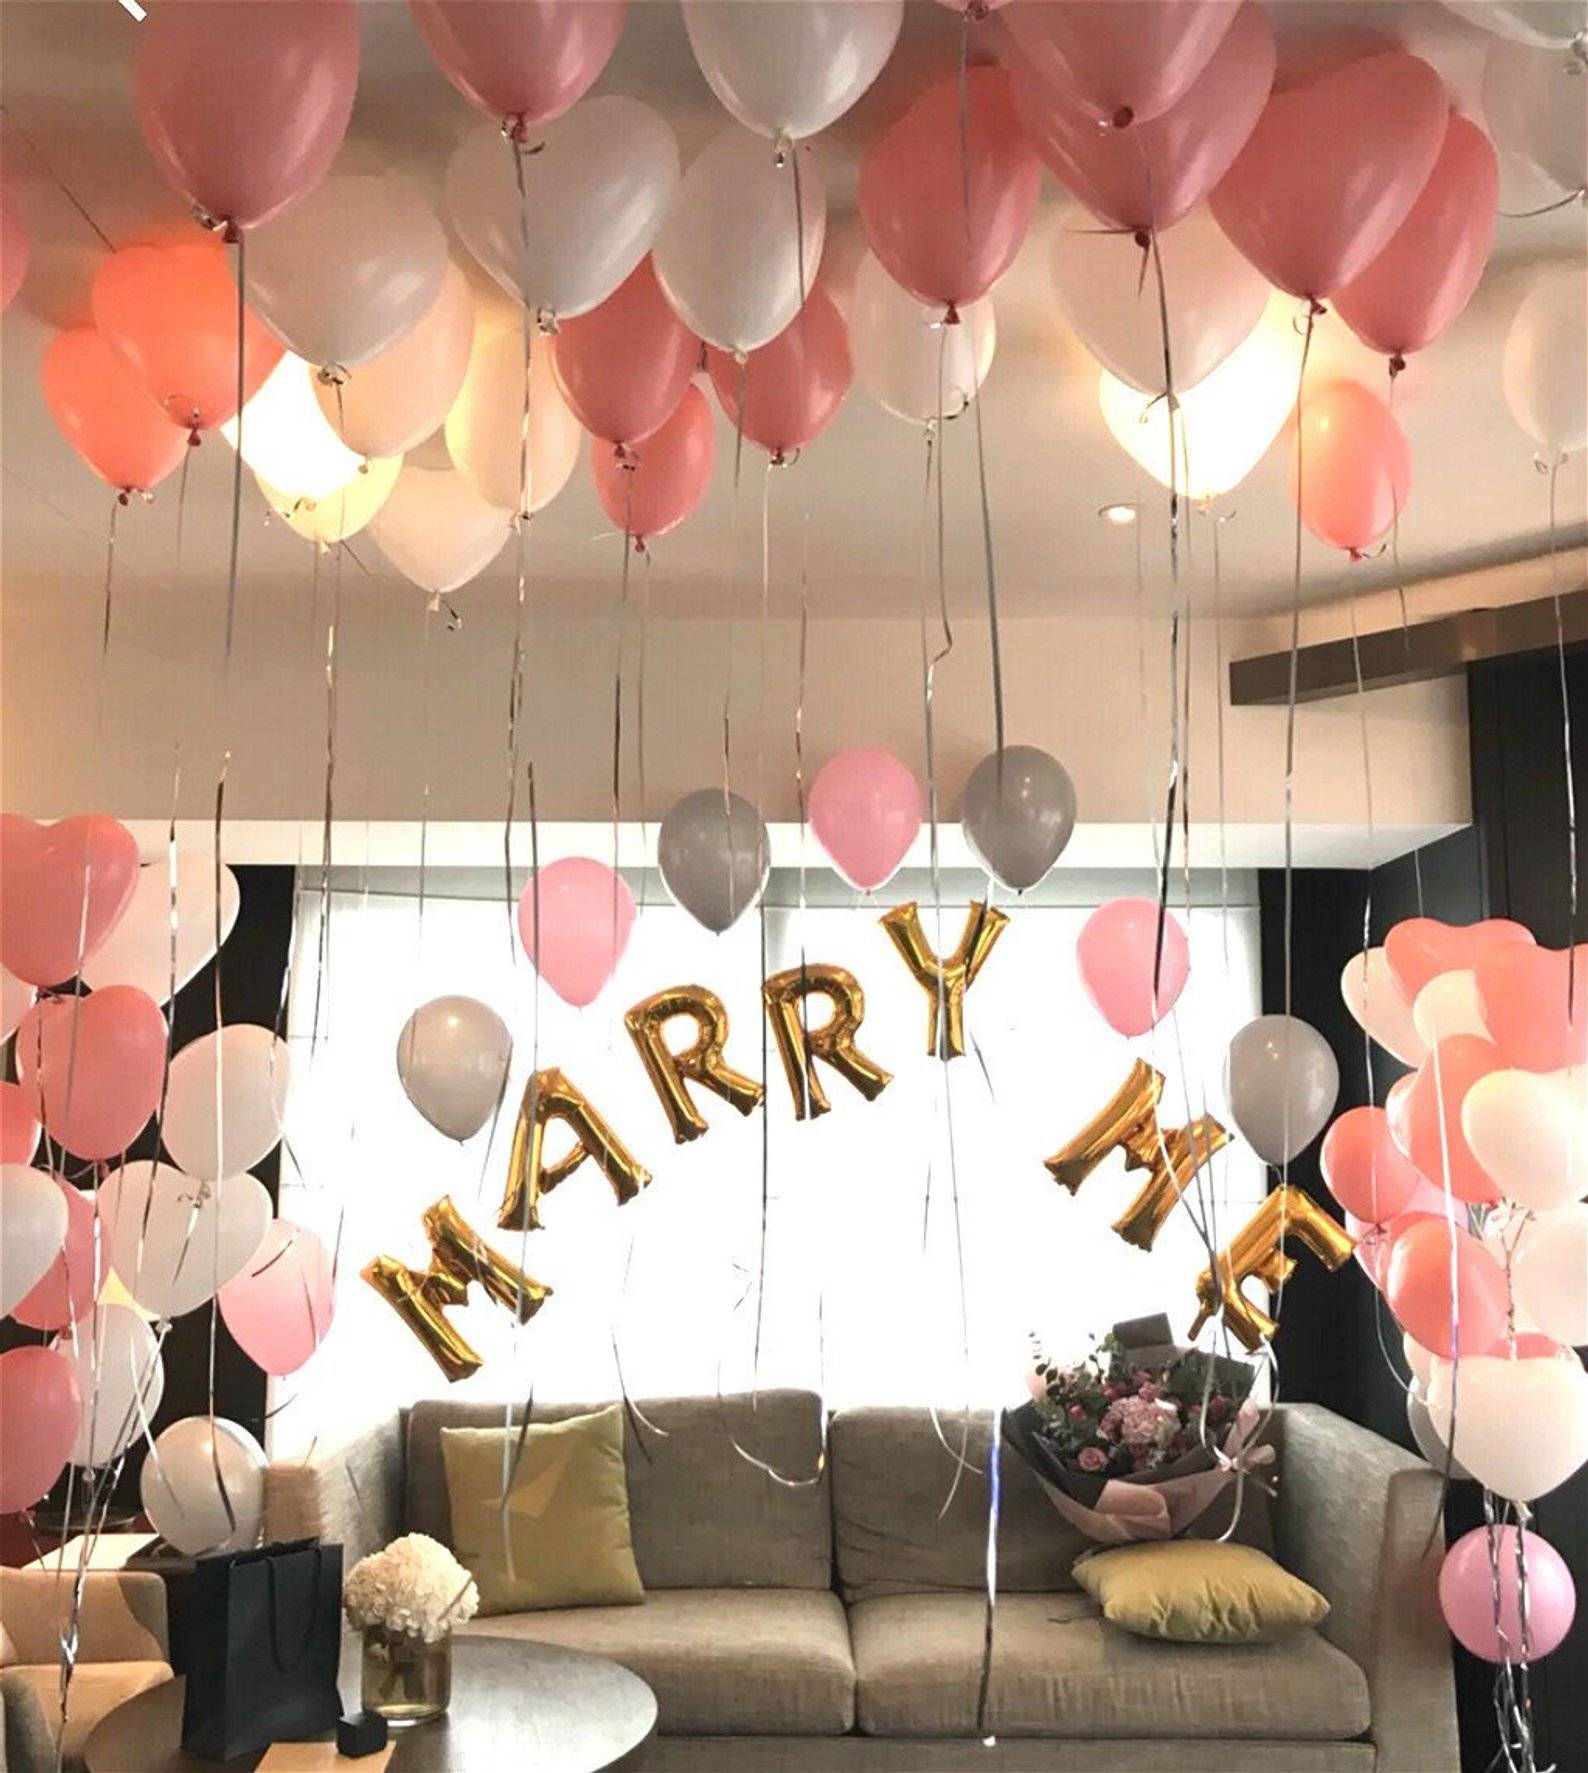 Marry Me Balloon Set in Rose Gold/ Gold/ Silver | Surprise Proposal Decor | Marriage Proposal Ideas | Surprise Proposal Idea